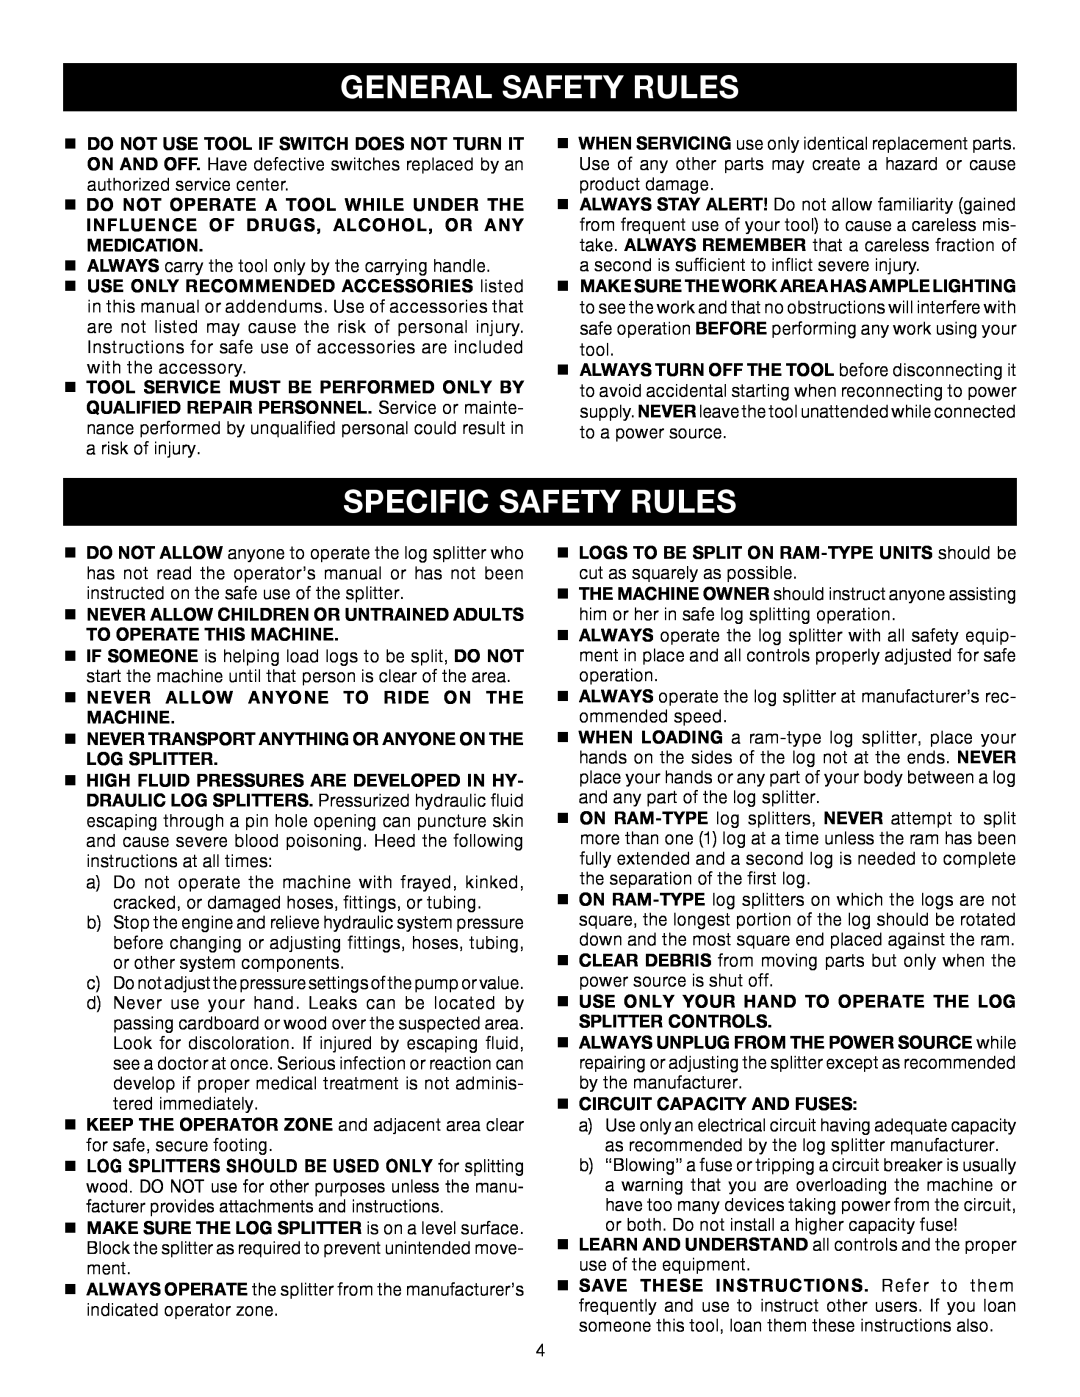 Ryobi Outdoor RY49701 manual Specific Safety Rules, General Safety Rules 